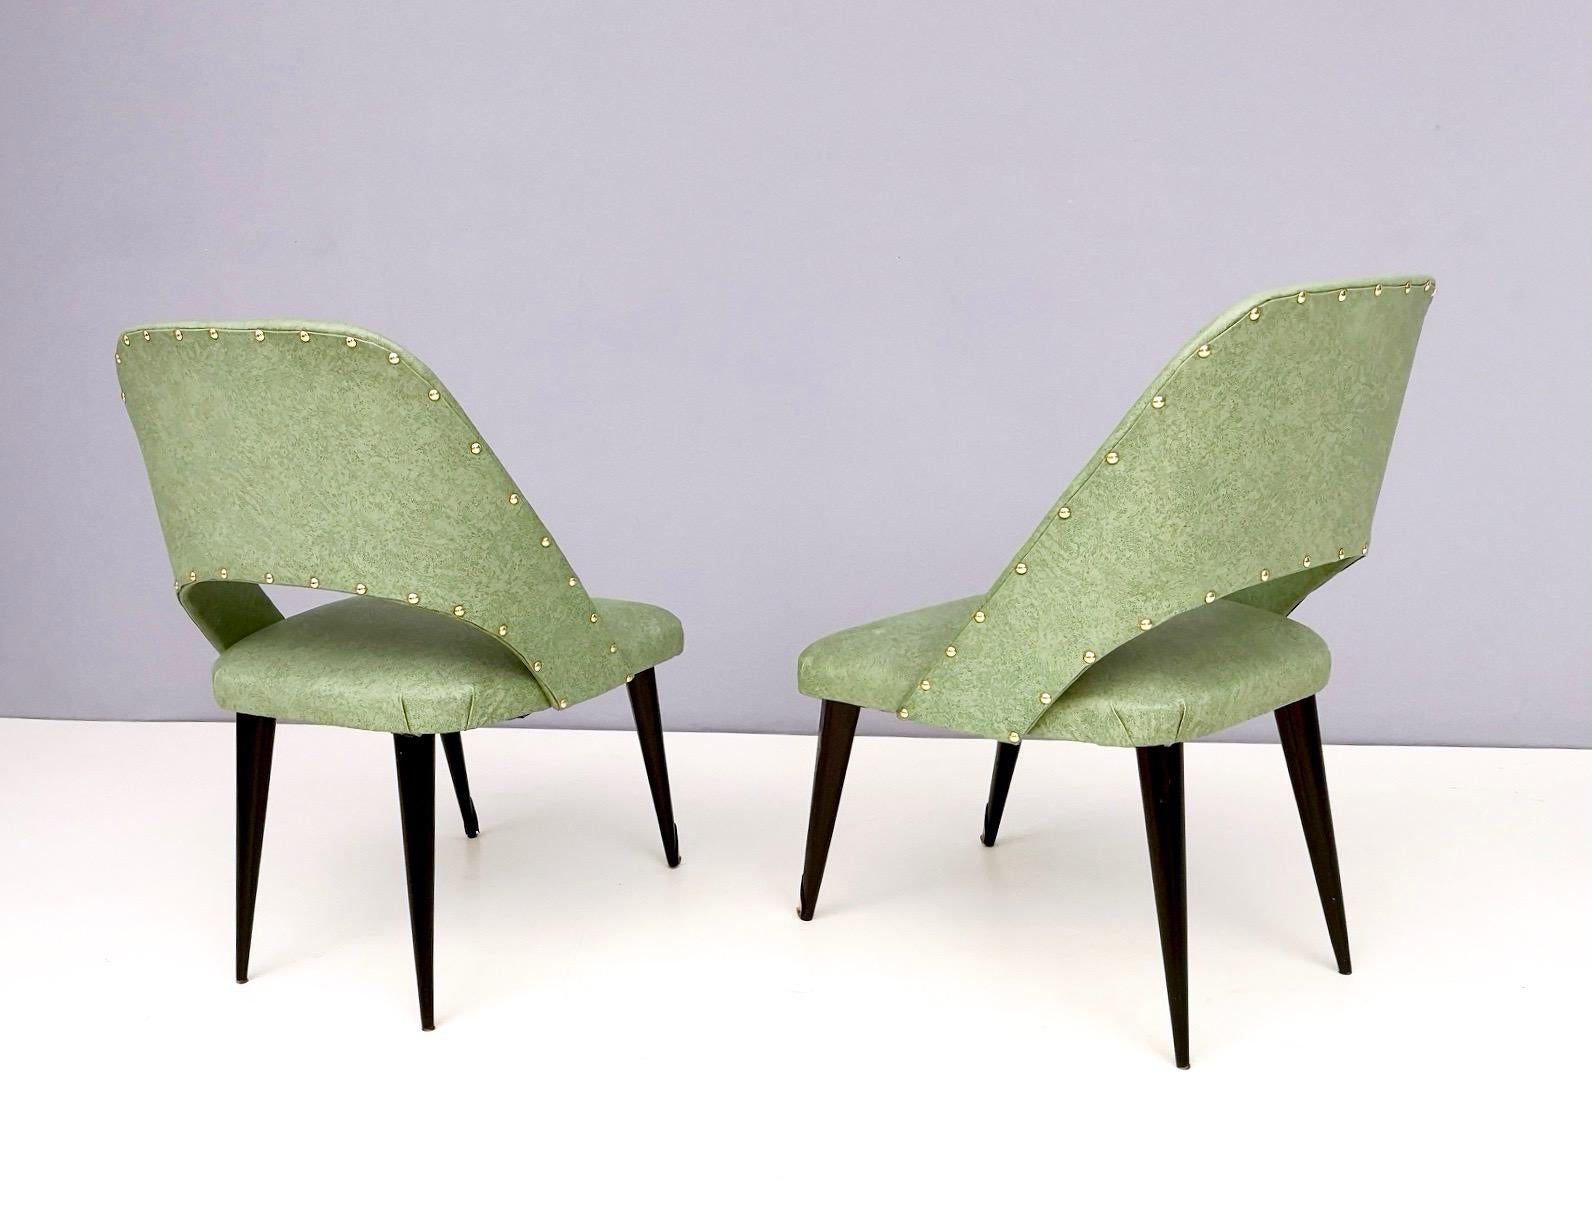 Pair of Vintage Green Skai Side Chairs with Ebonized Wood Legs, Italy In Good Condition For Sale In Bresso, Lombardy